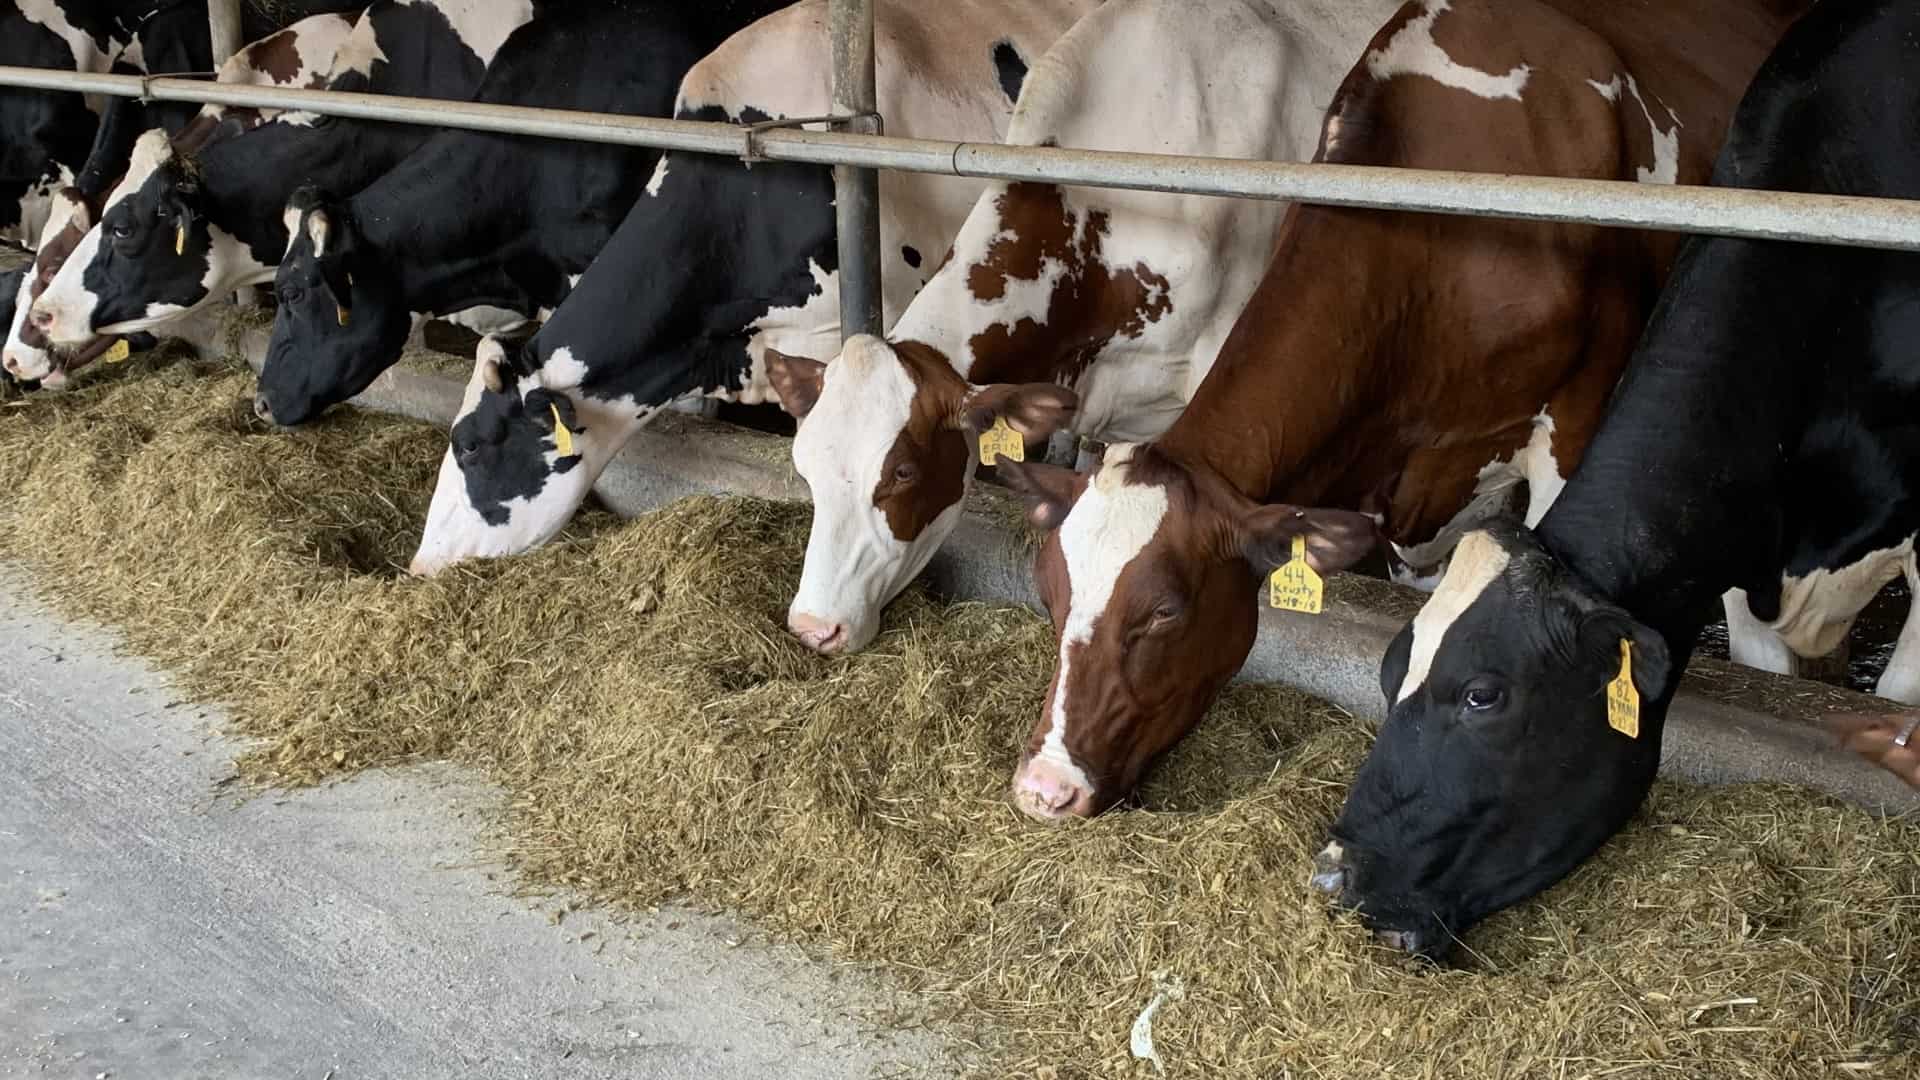 Central Pa. dairy farmers working to keep cows cool during the heatwave